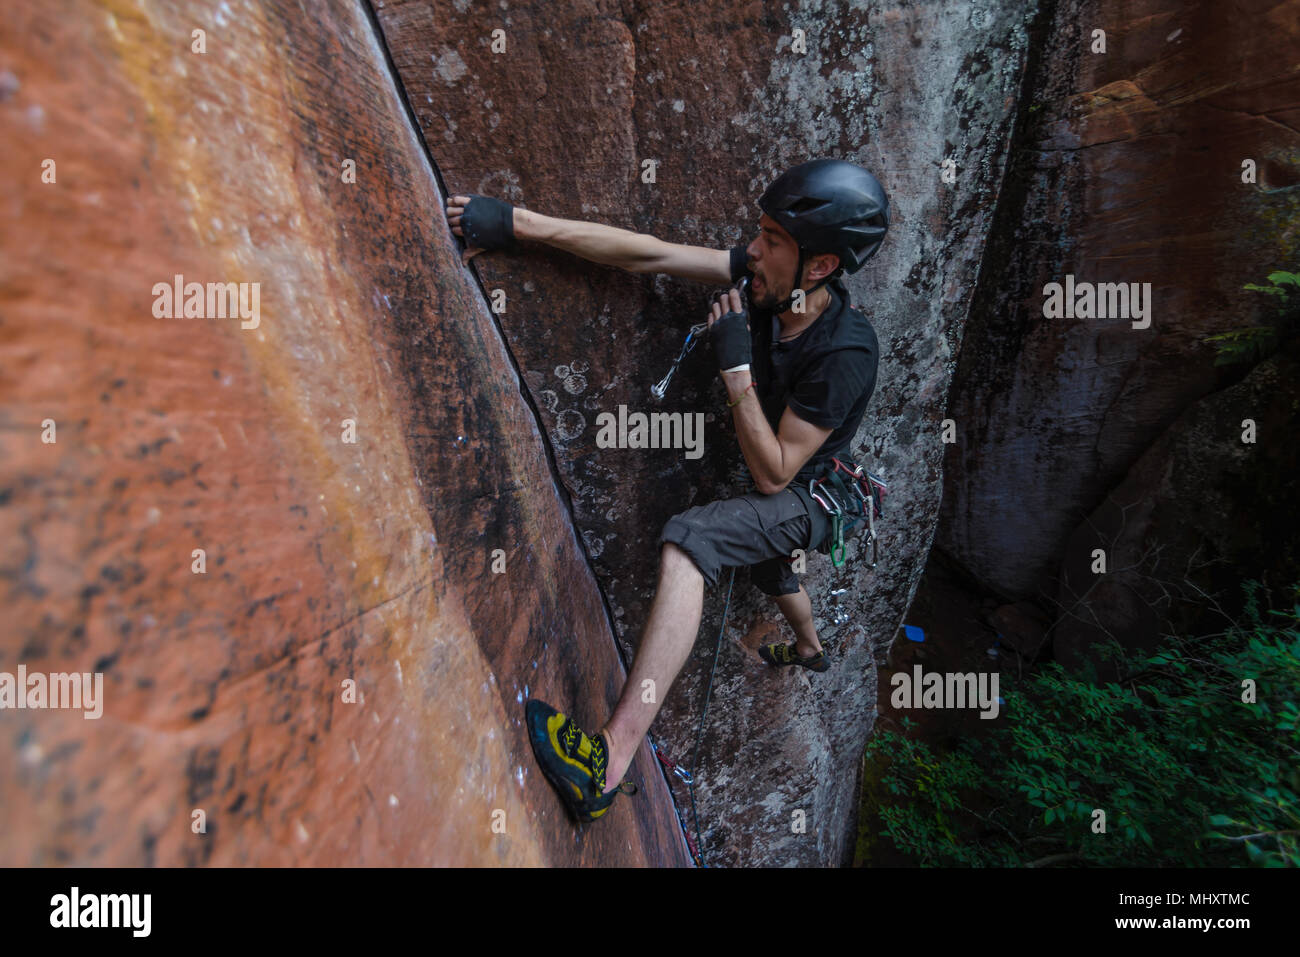 Rock climber climbing sandstone rock, elevated view, Liming, Yunnan Province, China Stock Photo